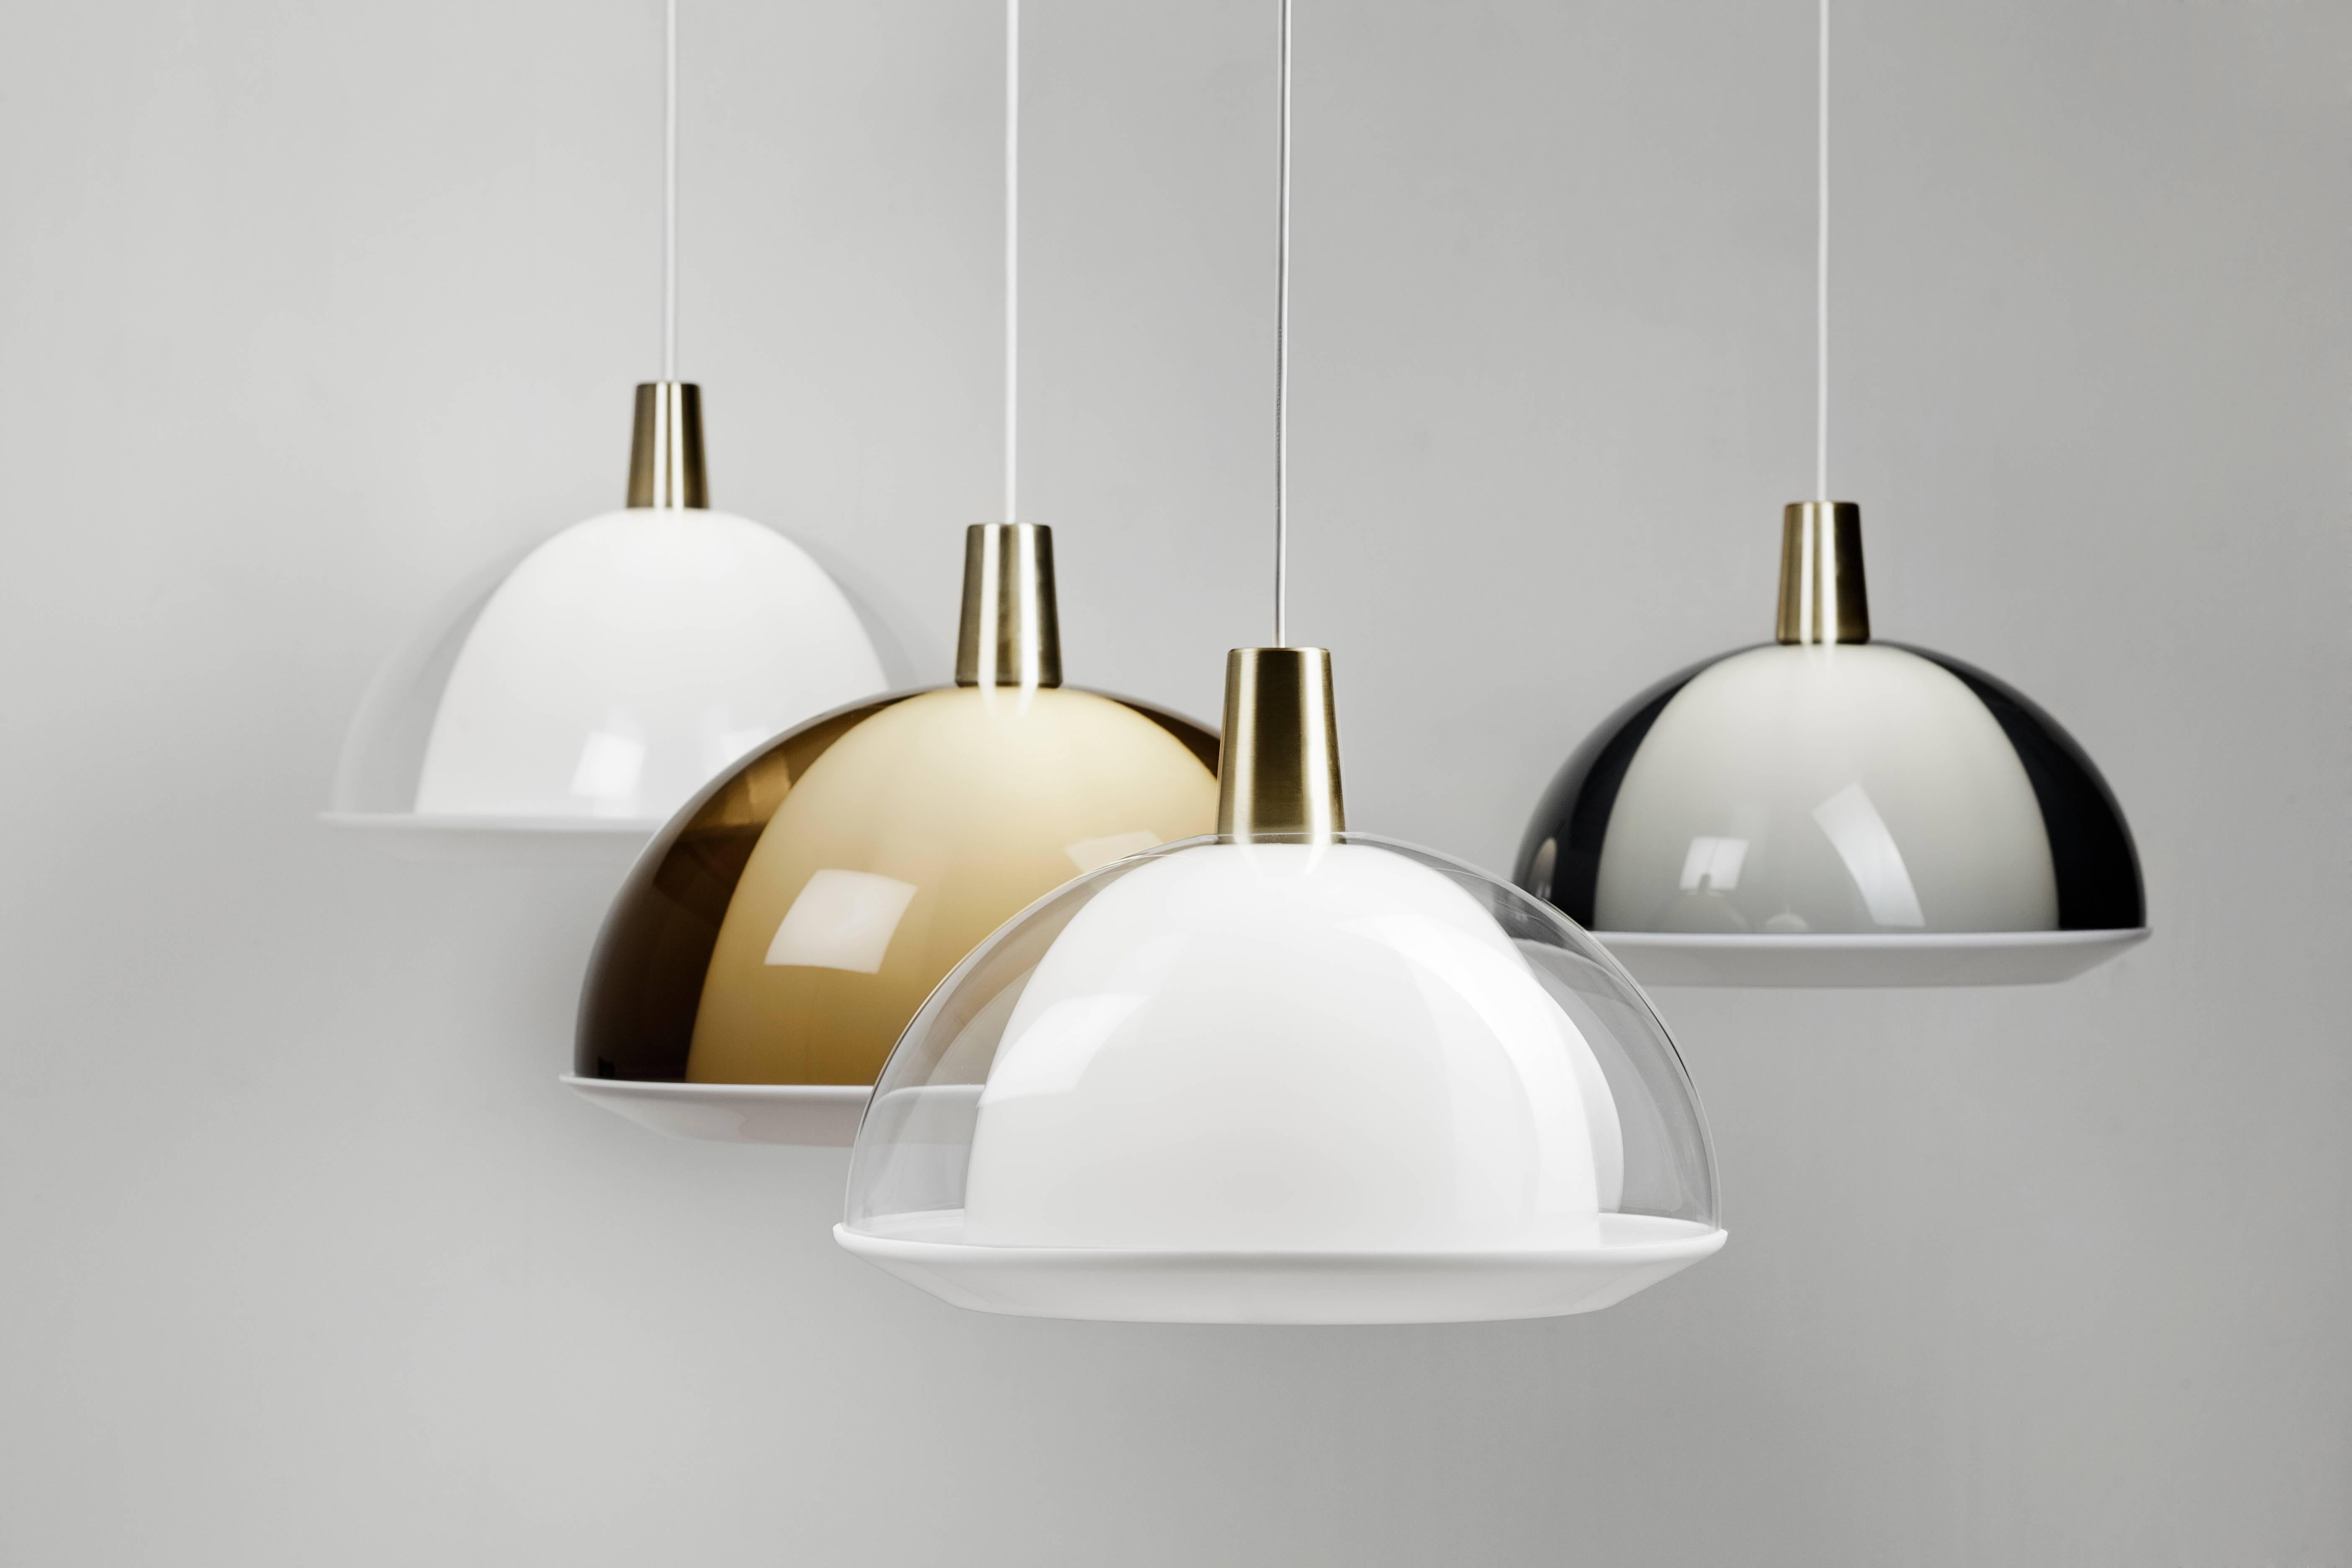 Pair of Small Yki Nummi 'Kuplat' Pendants in Smoke Gray. Designed in 1959, Nummi's iconic light consists of two acrylic shades of different colors, one nesting inside the other. The name Kuplat means bubbles in Finnish. As Nummi once astutely